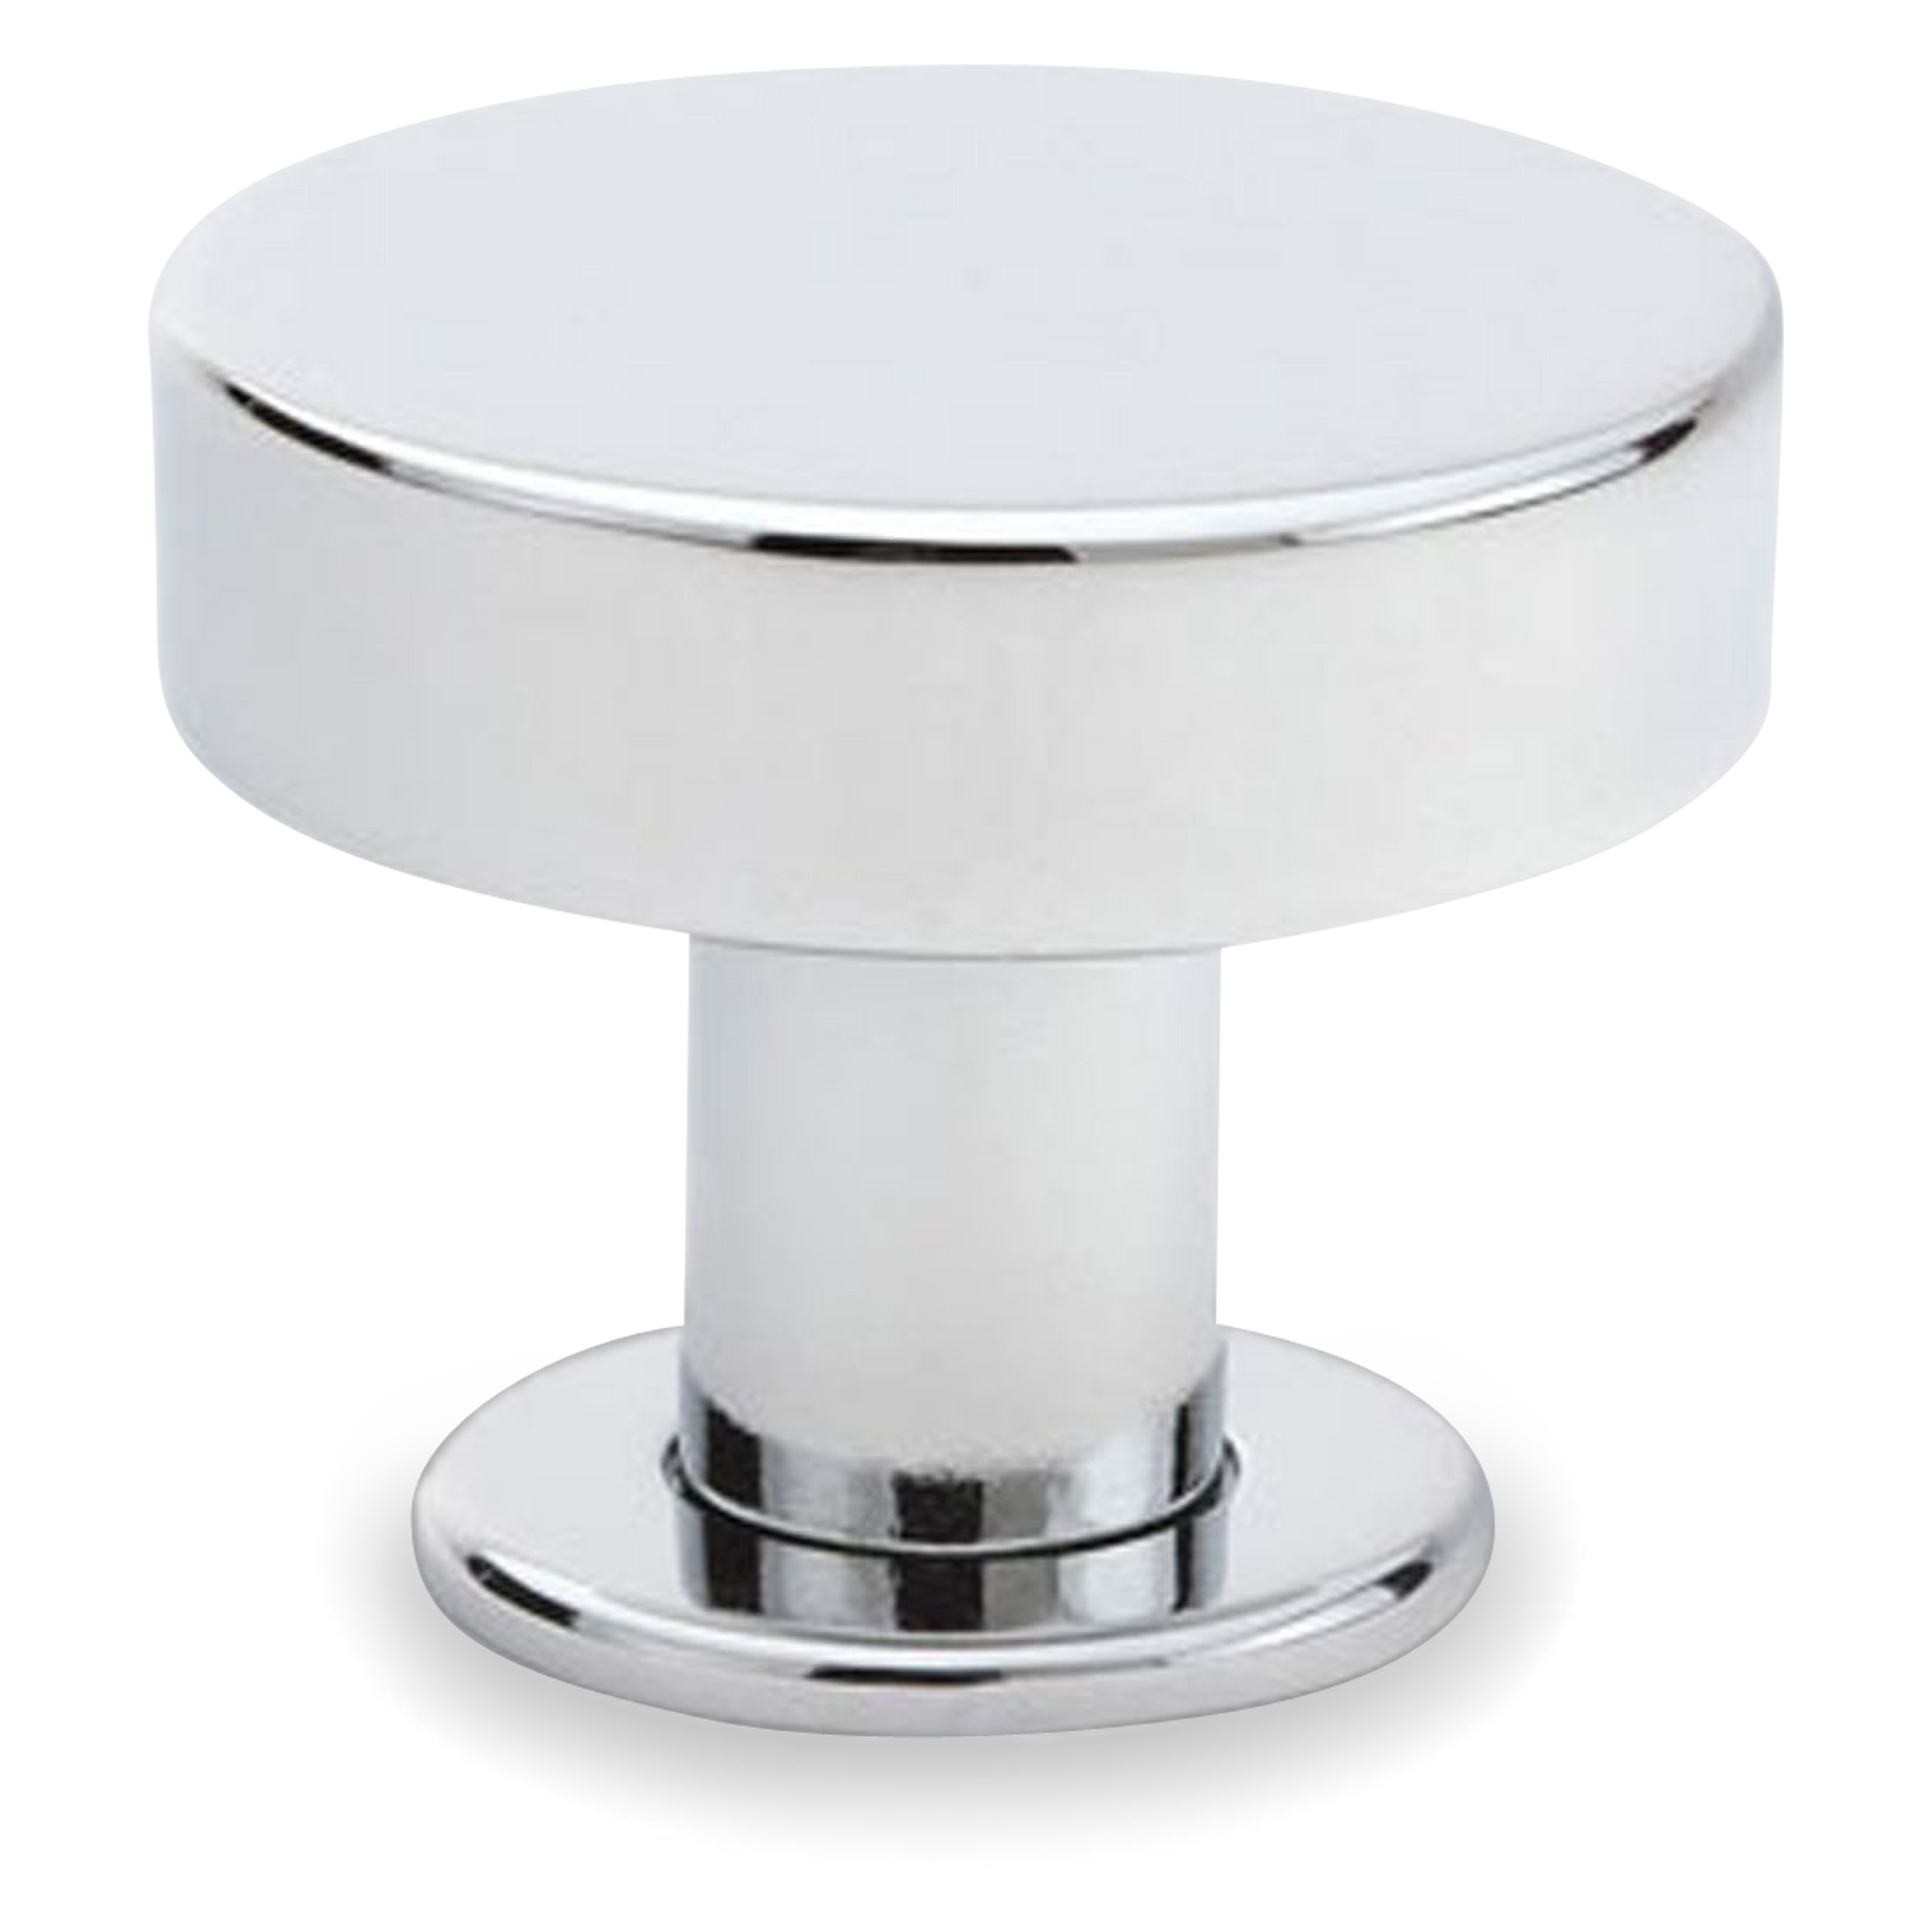 A sleek and contemporary round knob with a flat face.